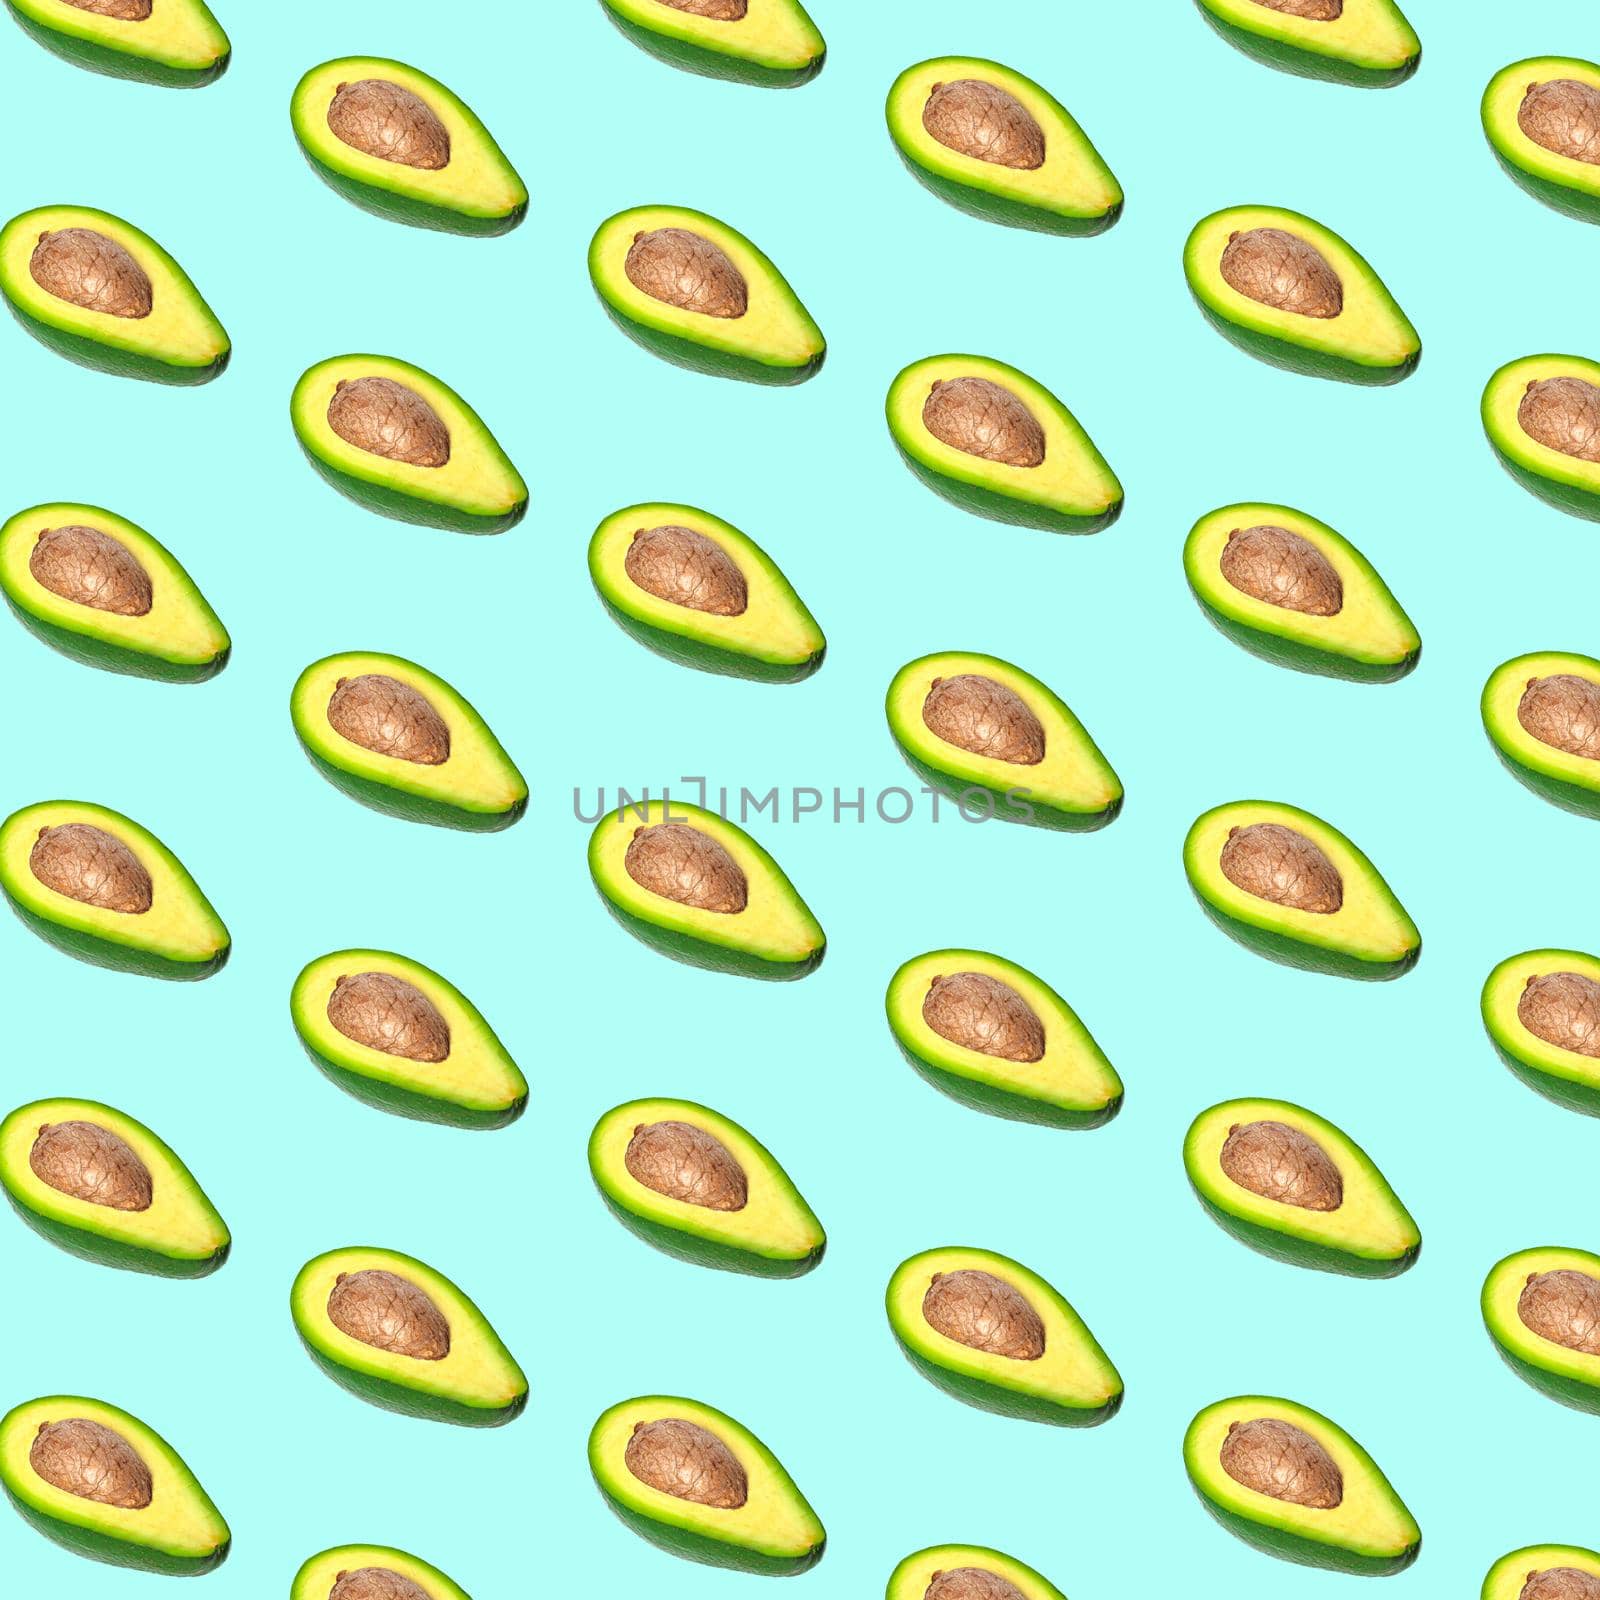 Avocado pattern on color background. Top view. Banner. Pop art design, creative summer food concept by Fabrikasimf